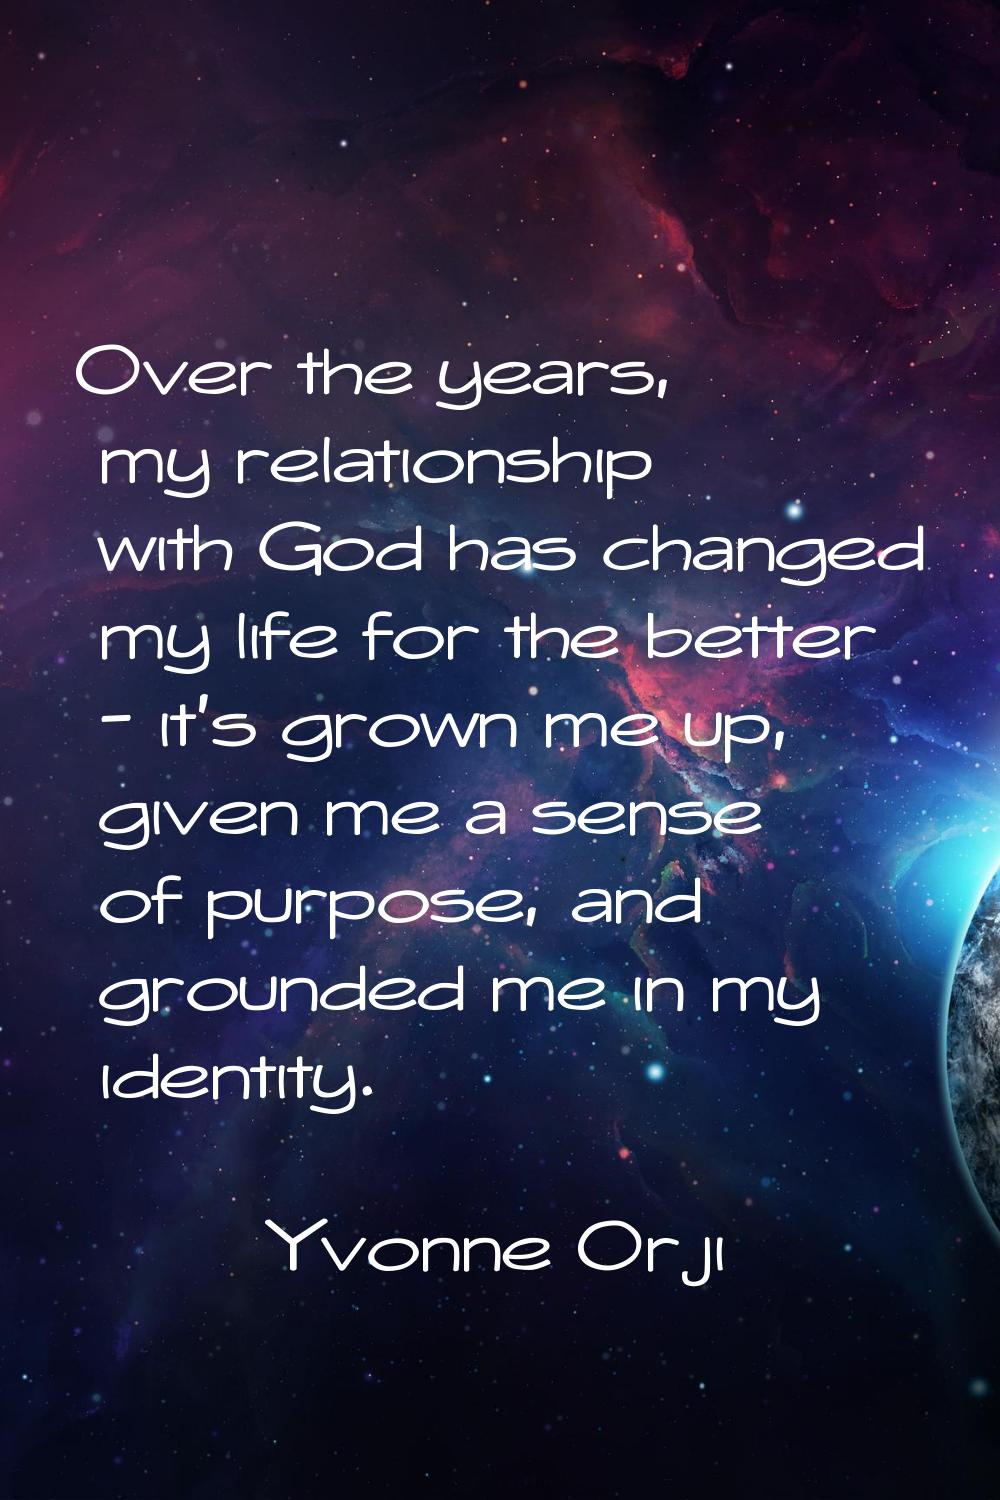 Over the years, my relationship with God has changed my life for the better - it's grown me up, giv